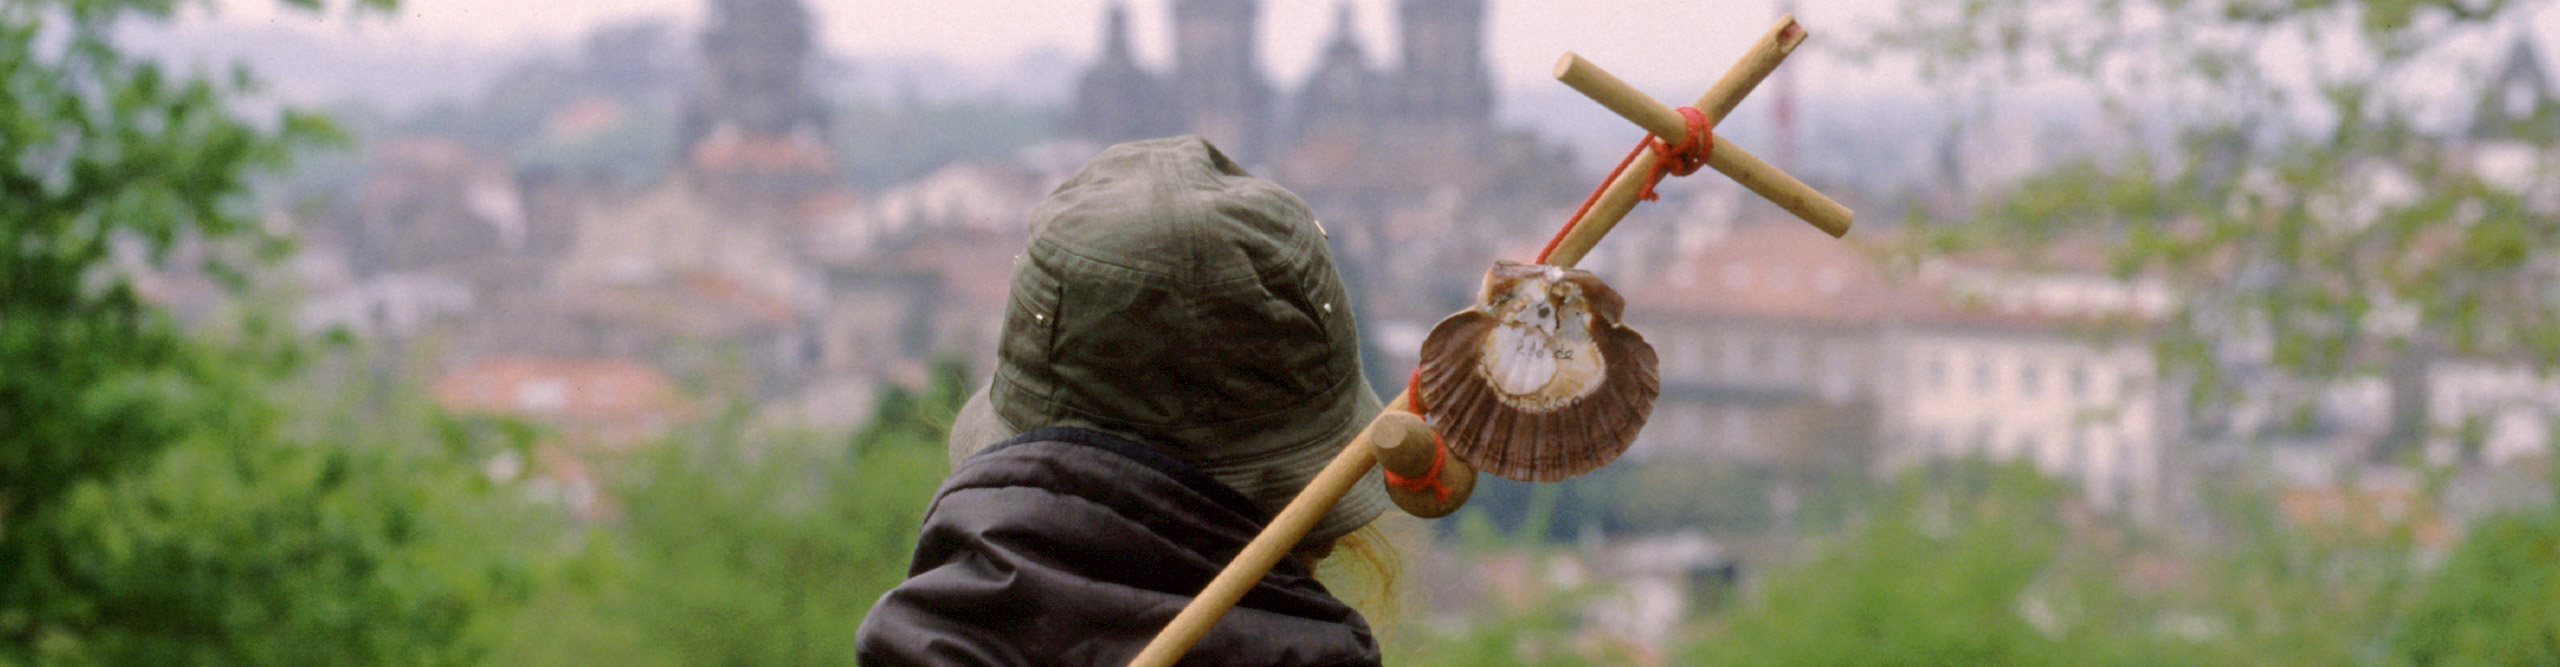 Traveller with backpack and shell for his pilgrimage in Camino de Santiago